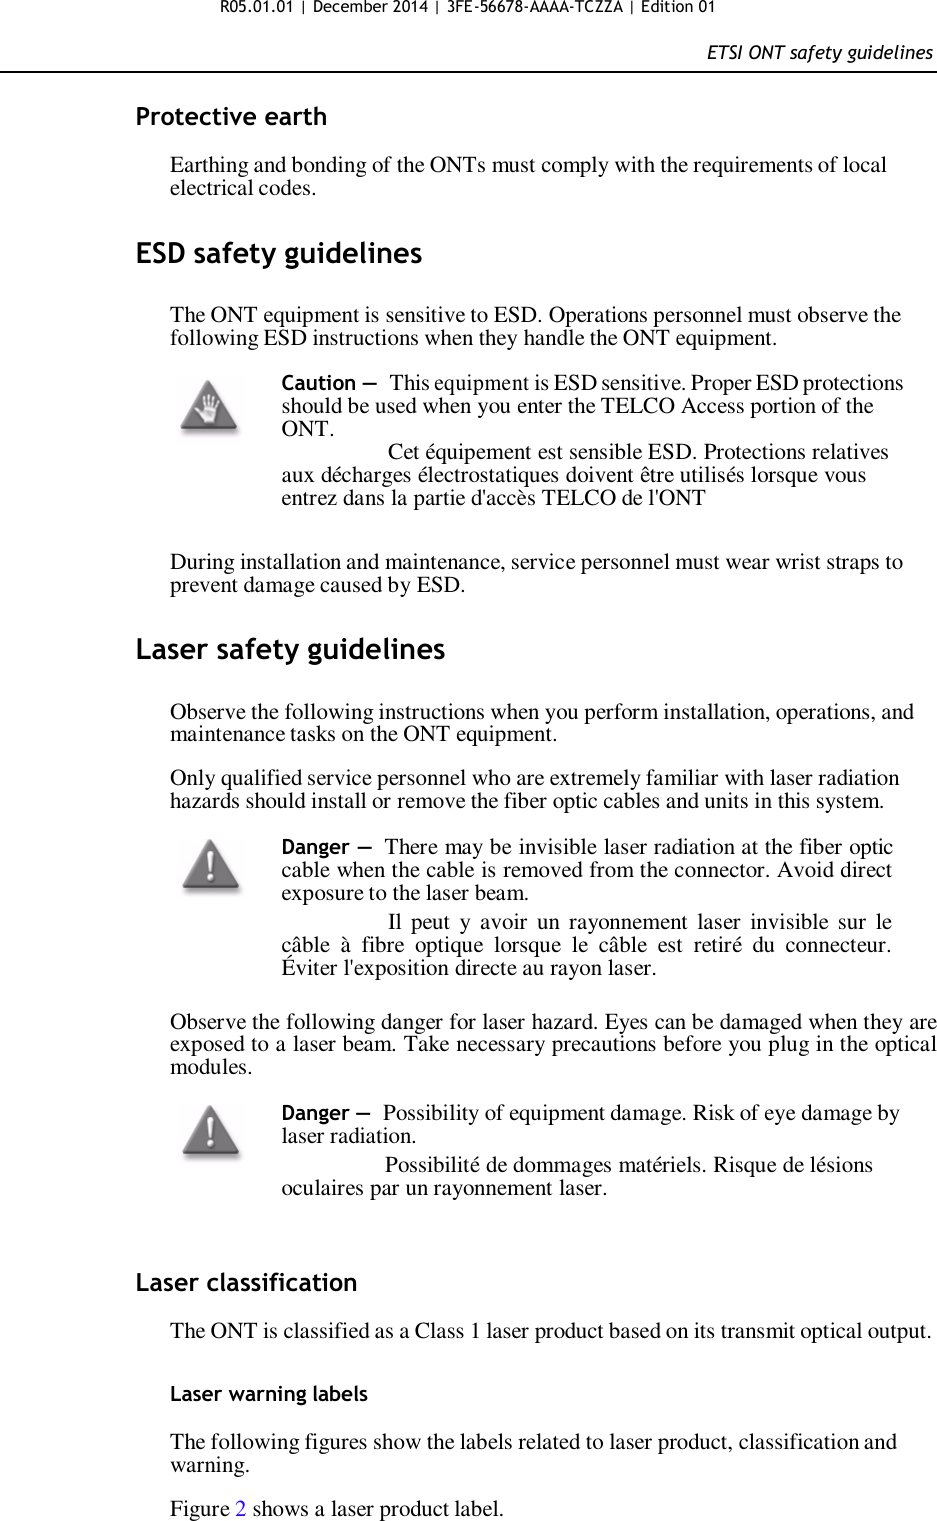 R05.01.01 | December 2014 | 3FE-56678-AAAA-TCZZA | Edition 01  ETSI ONT safety guidelines   Protective earth  Earthing and bonding of the ONTs must comply with the requirements of local electrical codes.   ESD safety guidelines   The ONT equipment is sensitive to ESD. Operations personnel must observe the following ESD instructions when they handle the ONT equipment.  Caution — This equipment is ESD sensitive. Proper ESD protections should be used when you enter the TELCO Access portion of the ONT.                  Cet équipement est sensible ESD. Protections relatives aux décharges électrostatiques doivent être utilisés lorsque vous entrez dans la partie d&apos;accès TELCO de l&apos;ONT   During installation and maintenance, service personnel must wear wrist straps to prevent damage caused by ESD.   Laser safety guidelines   Observe the following instructions when you perform installation, operations, and maintenance tasks on the ONT equipment.  Only qualified service personnel who are extremely familiar with laser radiation hazards should install or remove the fiber optic cables and units in this system.  Danger — There may be invisible laser radiation at the fiber optic cable when the cable is removed from the connector. Avoid direct exposure to the laser beam.                  Il peut  y  avoir  un rayonnement  laser  invisible sur  le câble  à  fibre  optique  lorsque  le  câble  est  retiré  du  connecteur. Éviter l&apos;exposition directe au rayon laser.  Observe the following danger for laser hazard. Eyes can be damaged when they are exposed to a laser beam. Take necessary precautions before you plug in the optical modules.  Danger — Possibility of equipment damage. Risk of eye damage by laser radiation.                   Possibilité de dommages matériels. Risque de lésions oculaires par un rayonnement laser.    Laser classification  The ONT is classified as a Class 1 laser product based on its transmit optical output.   Laser warning labels  The following figures show the labels related to laser product, classification and warning.  Figure 2 shows a laser product label.  